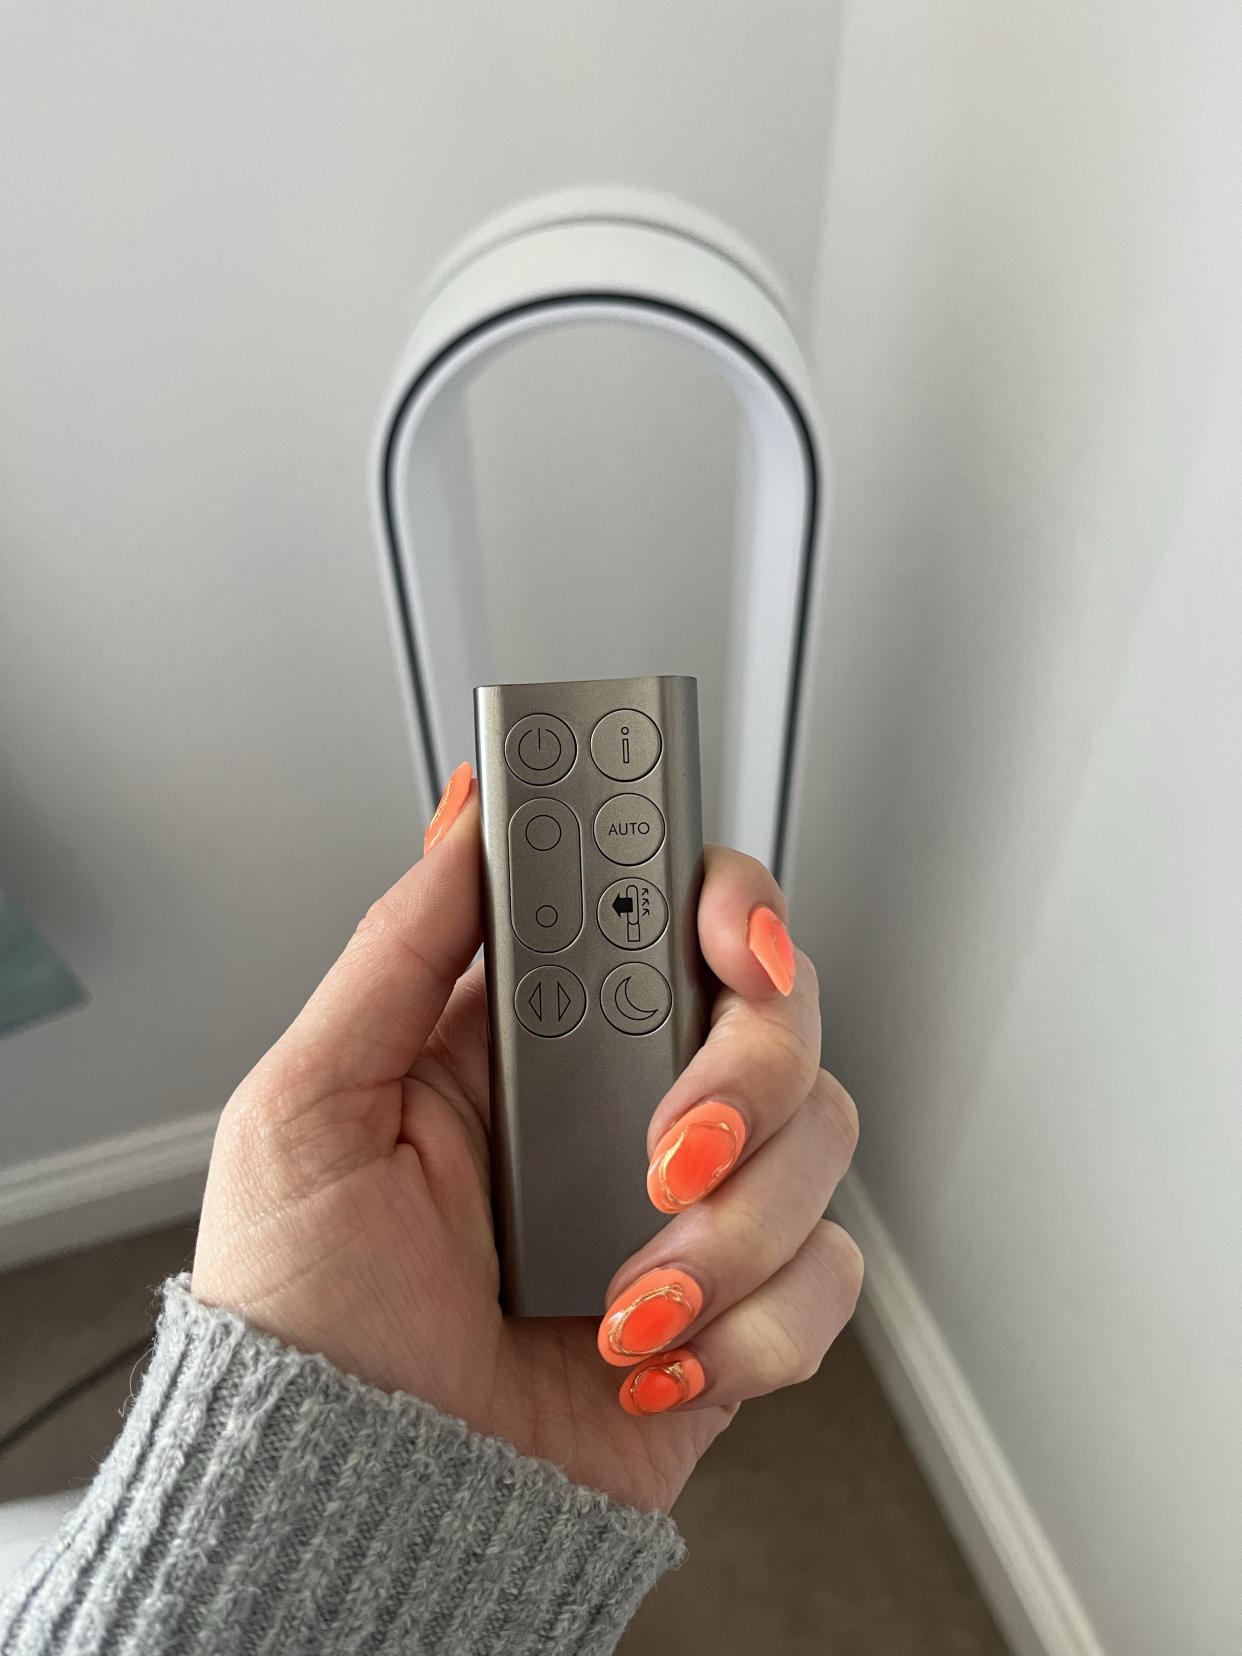 The easy to use remote makes changing settings or getting updates on the air quality simple. (Yahoo Life UK)